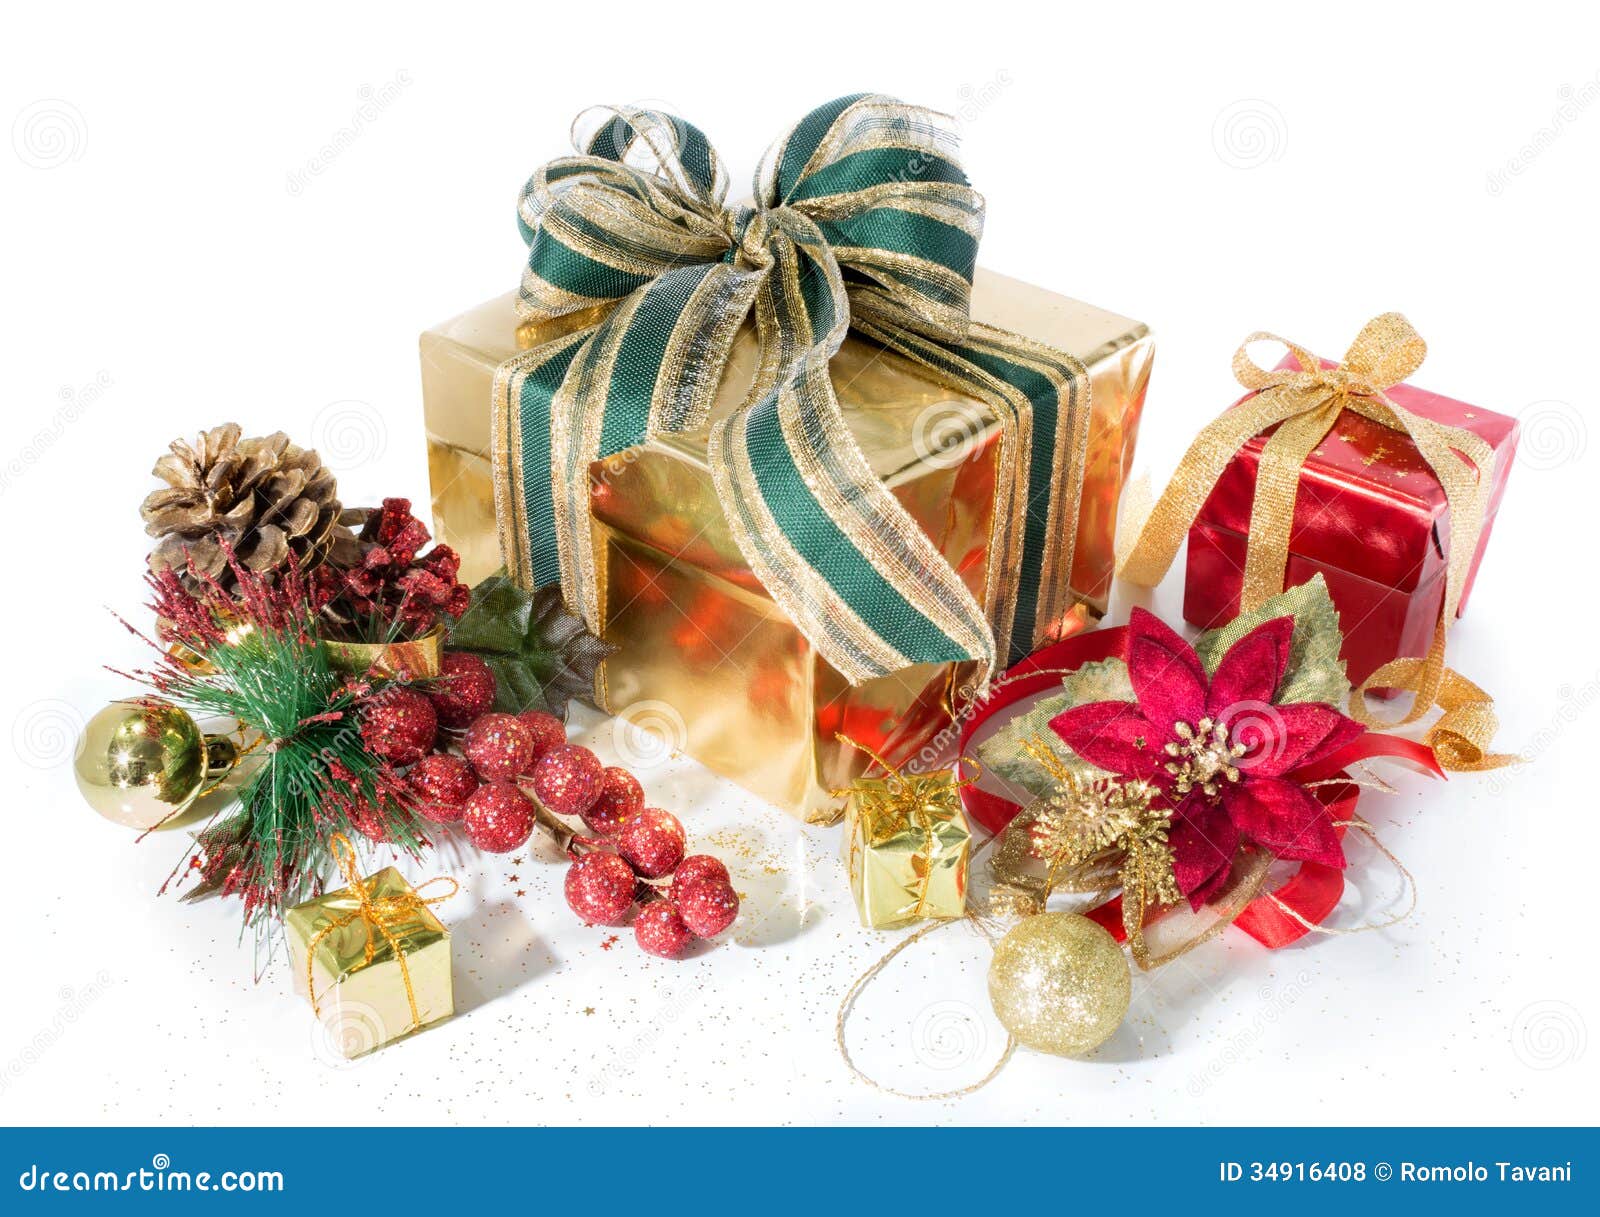 ... Stock Photos: Gift packages christmas red and golden, with decorations